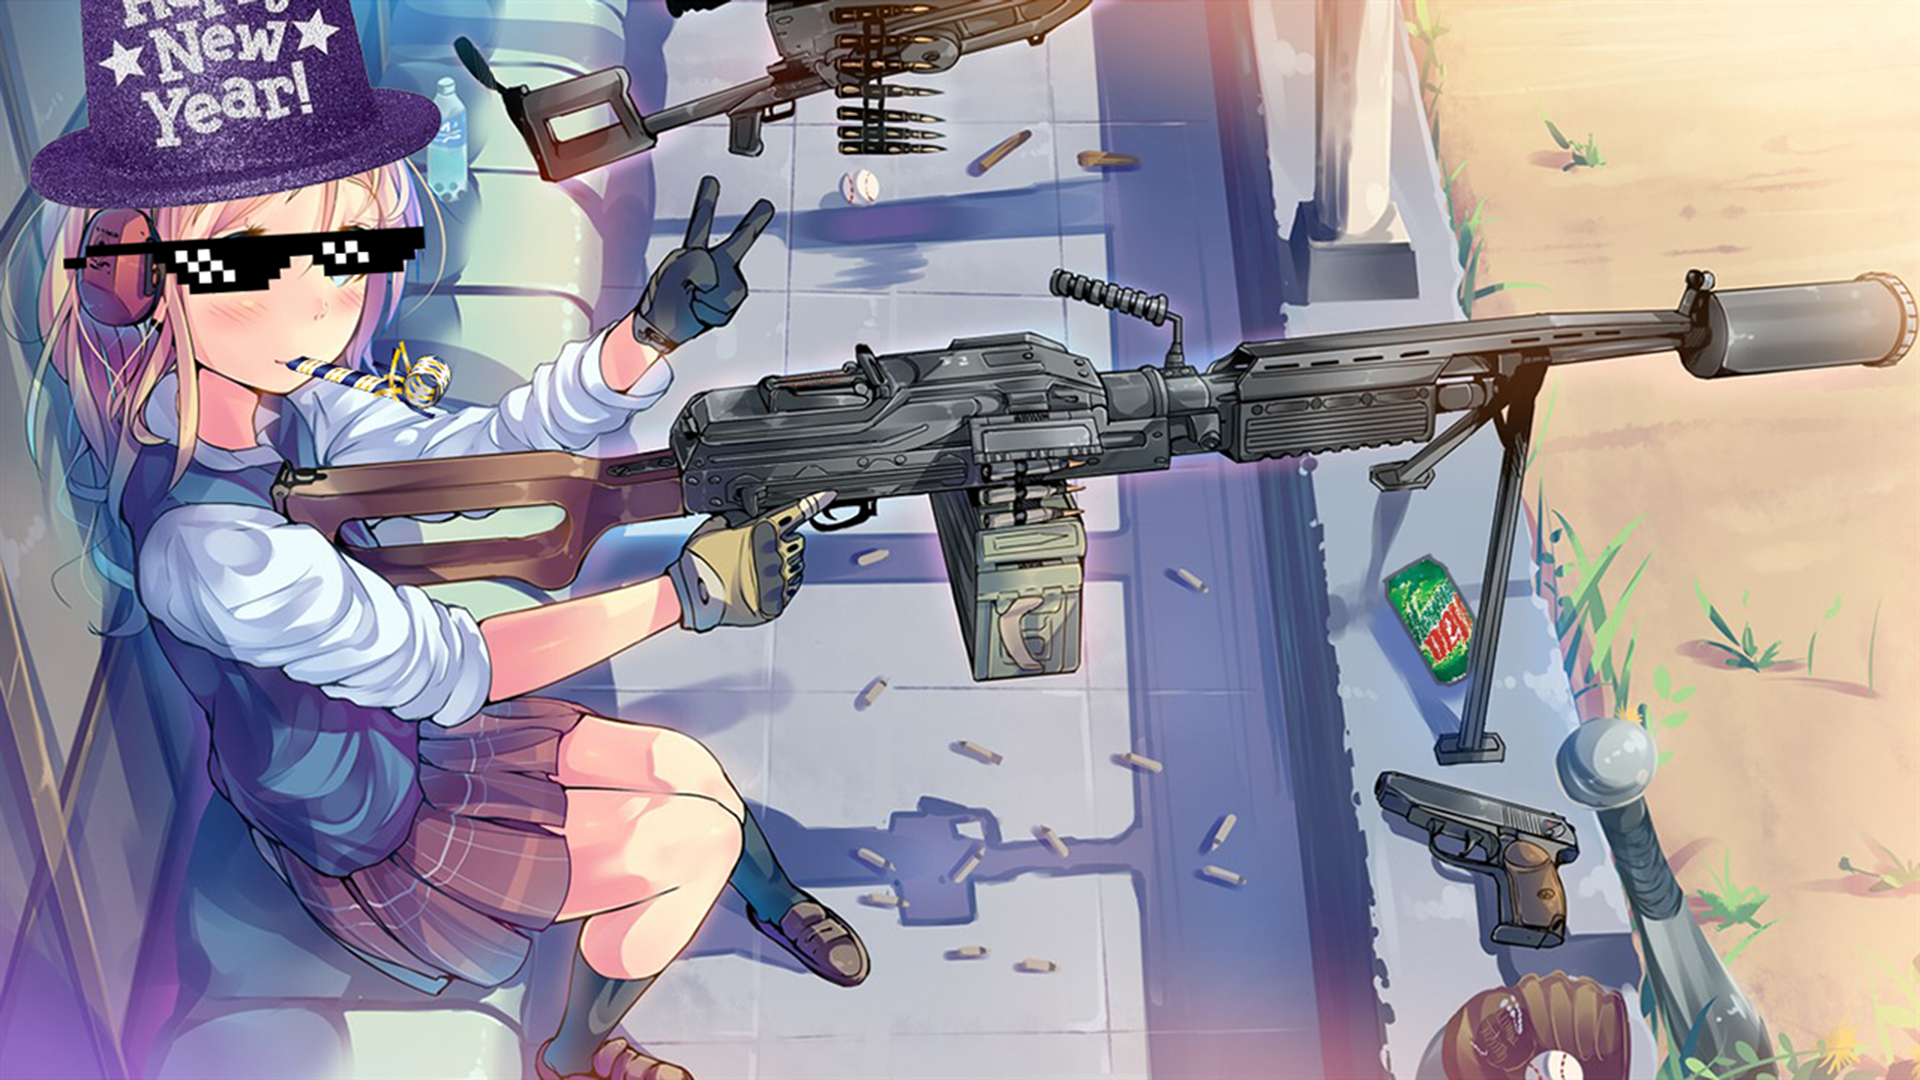 New Year Weapon Skirt Major League Gaming Mountain Dew Sunglasses 1920x1080